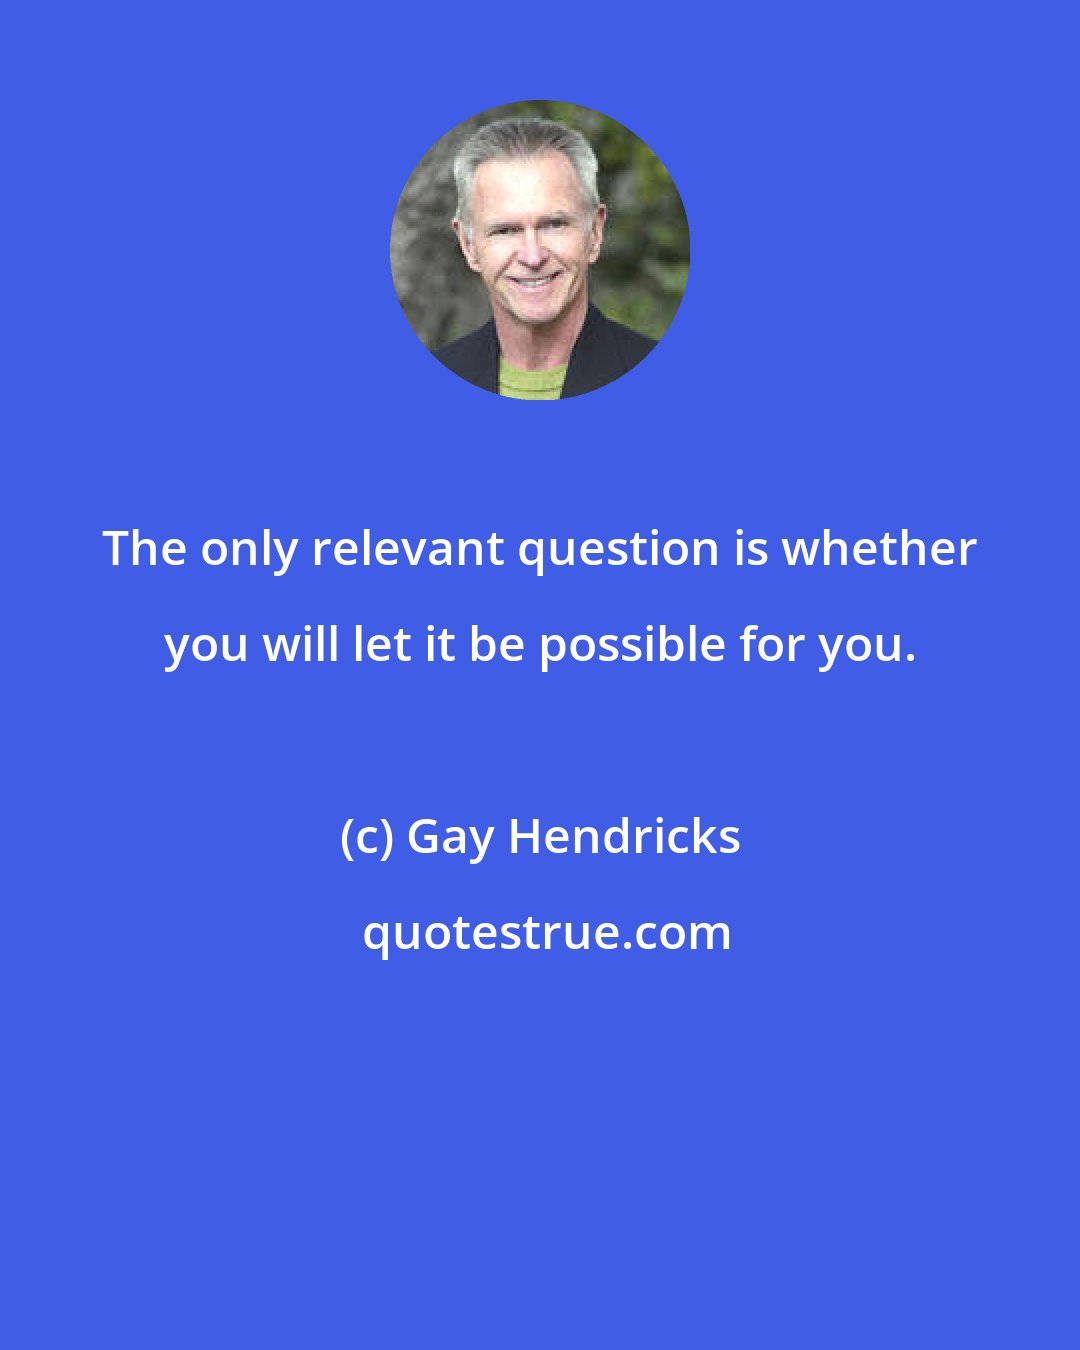 Gay Hendricks: The only relevant question is whether you will let it be possible for you.